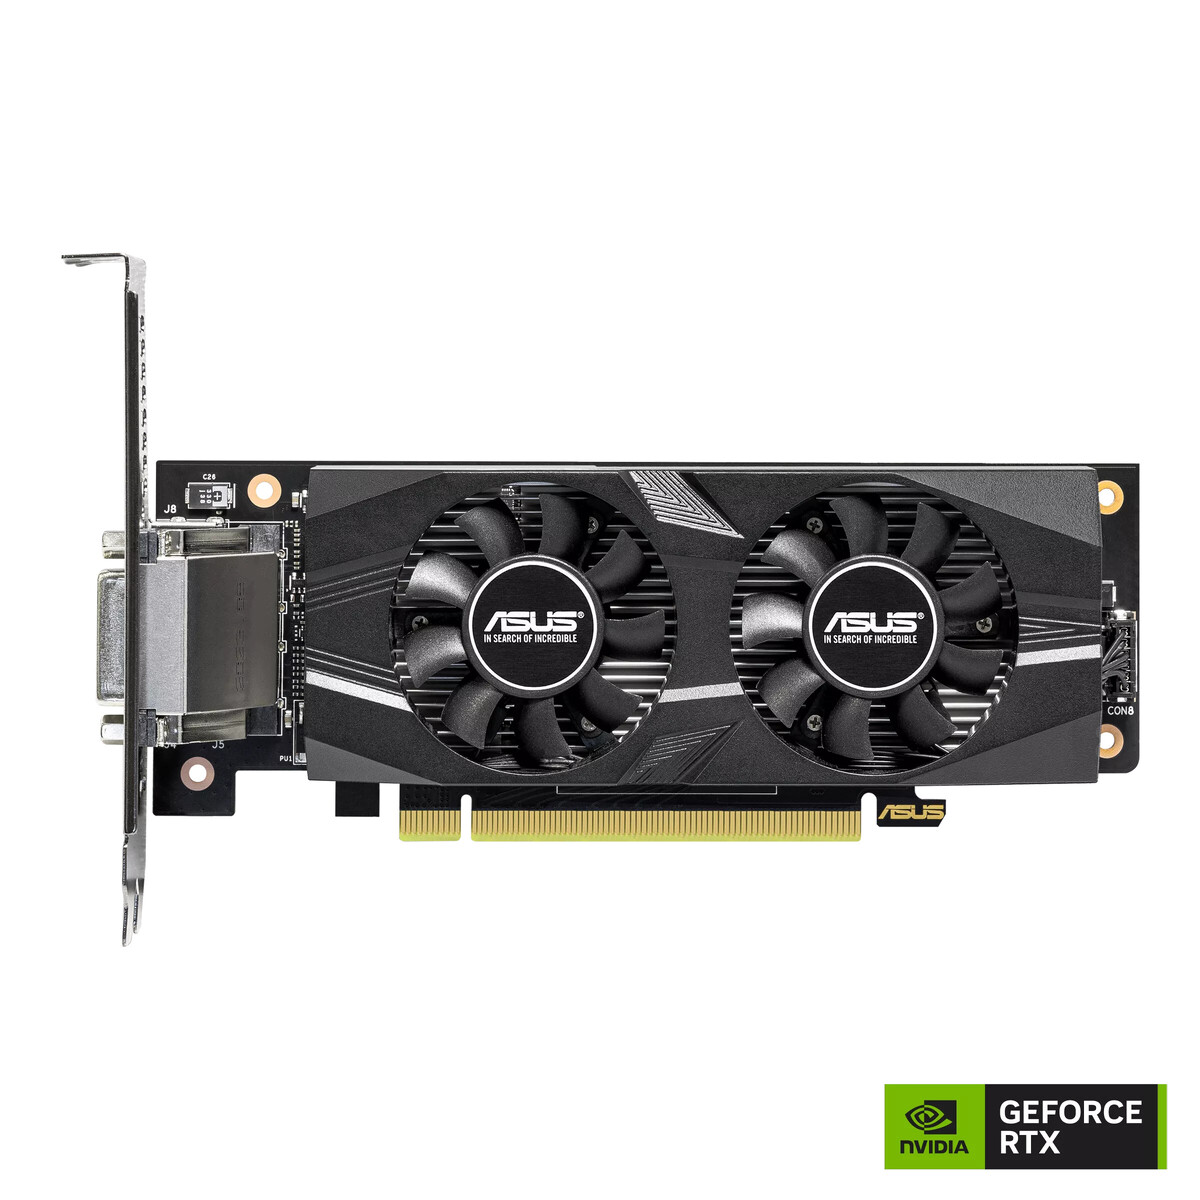 ASUS introduces low-profile GeForce RTX 3050 BRK 6 GB graphics cards.